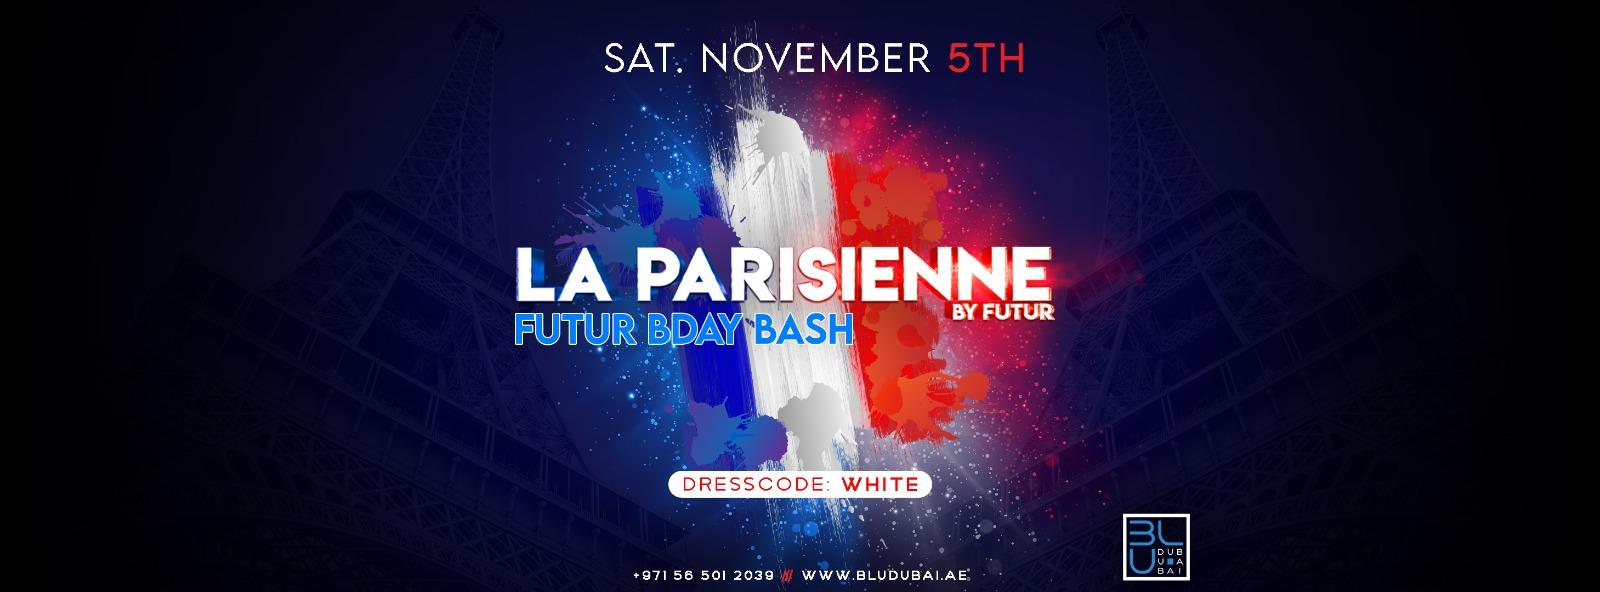 PARTY AT THE BIGGEST FRENCH PARTY WITH FUTUR'S BDAY BASH AT BLU!